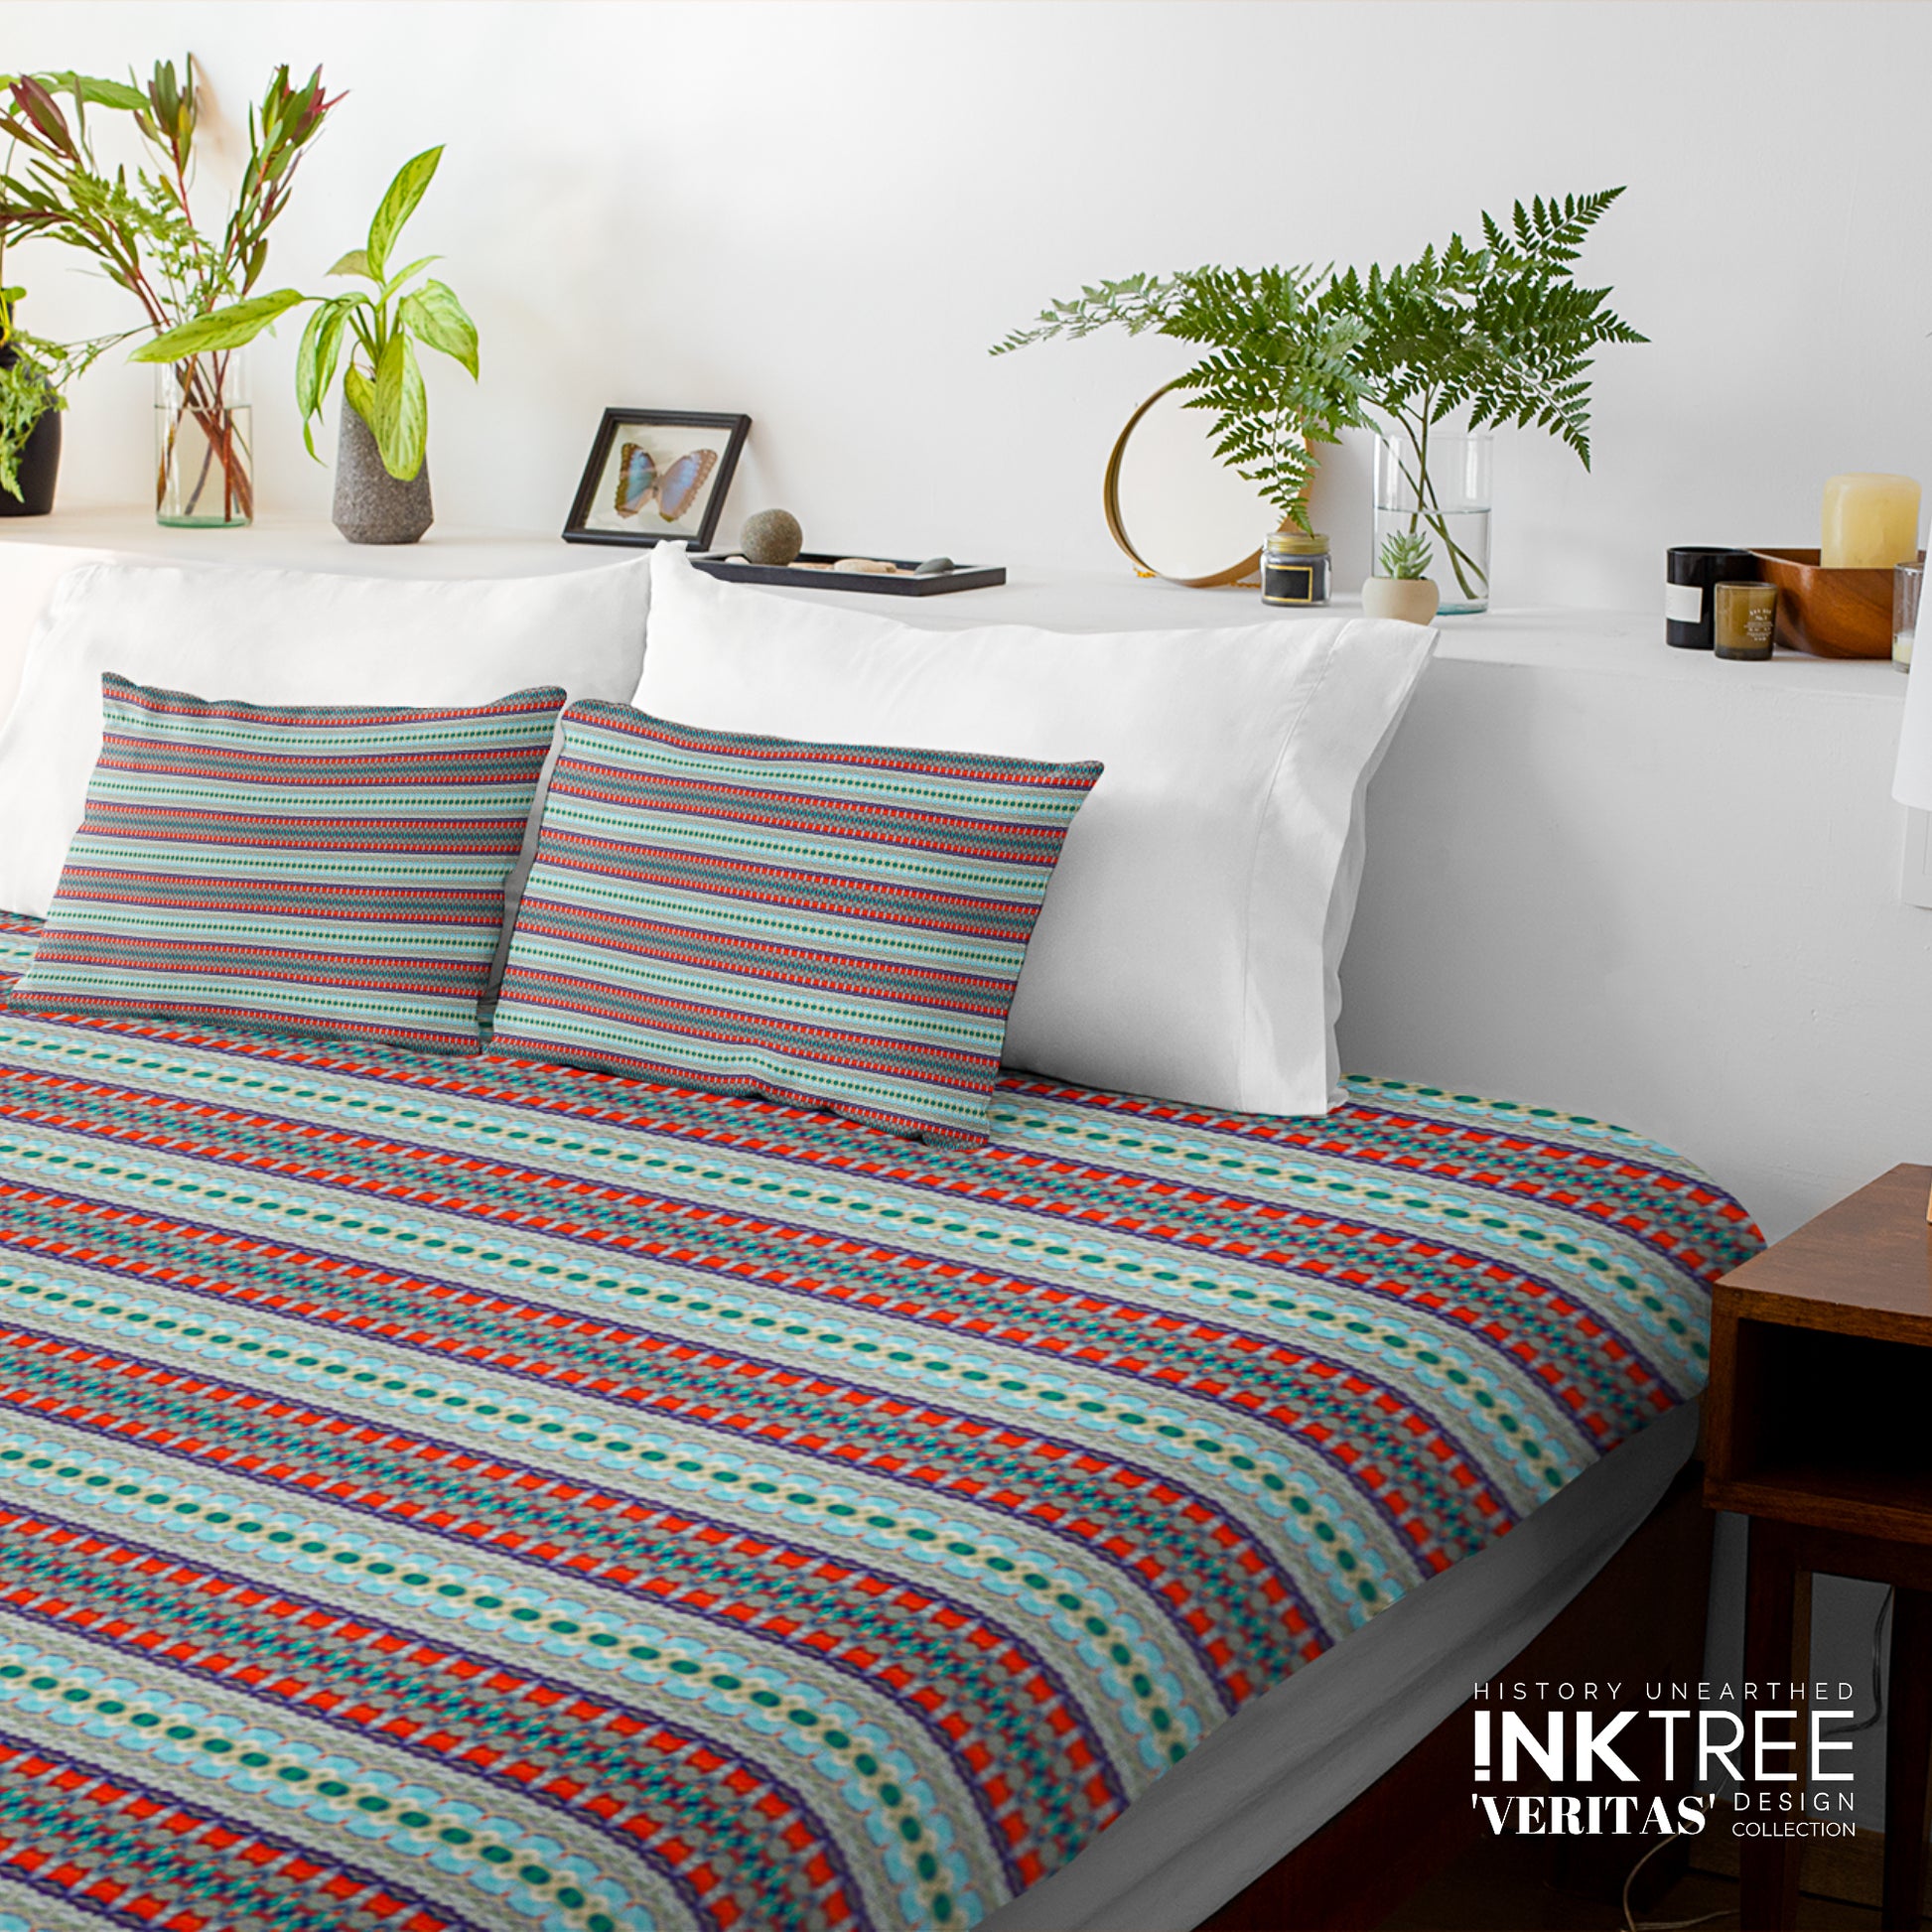 A doona cover and pillows with blue, red and green horizontal line pattern against a white wall, leaning against white pillows and green plants in vases.